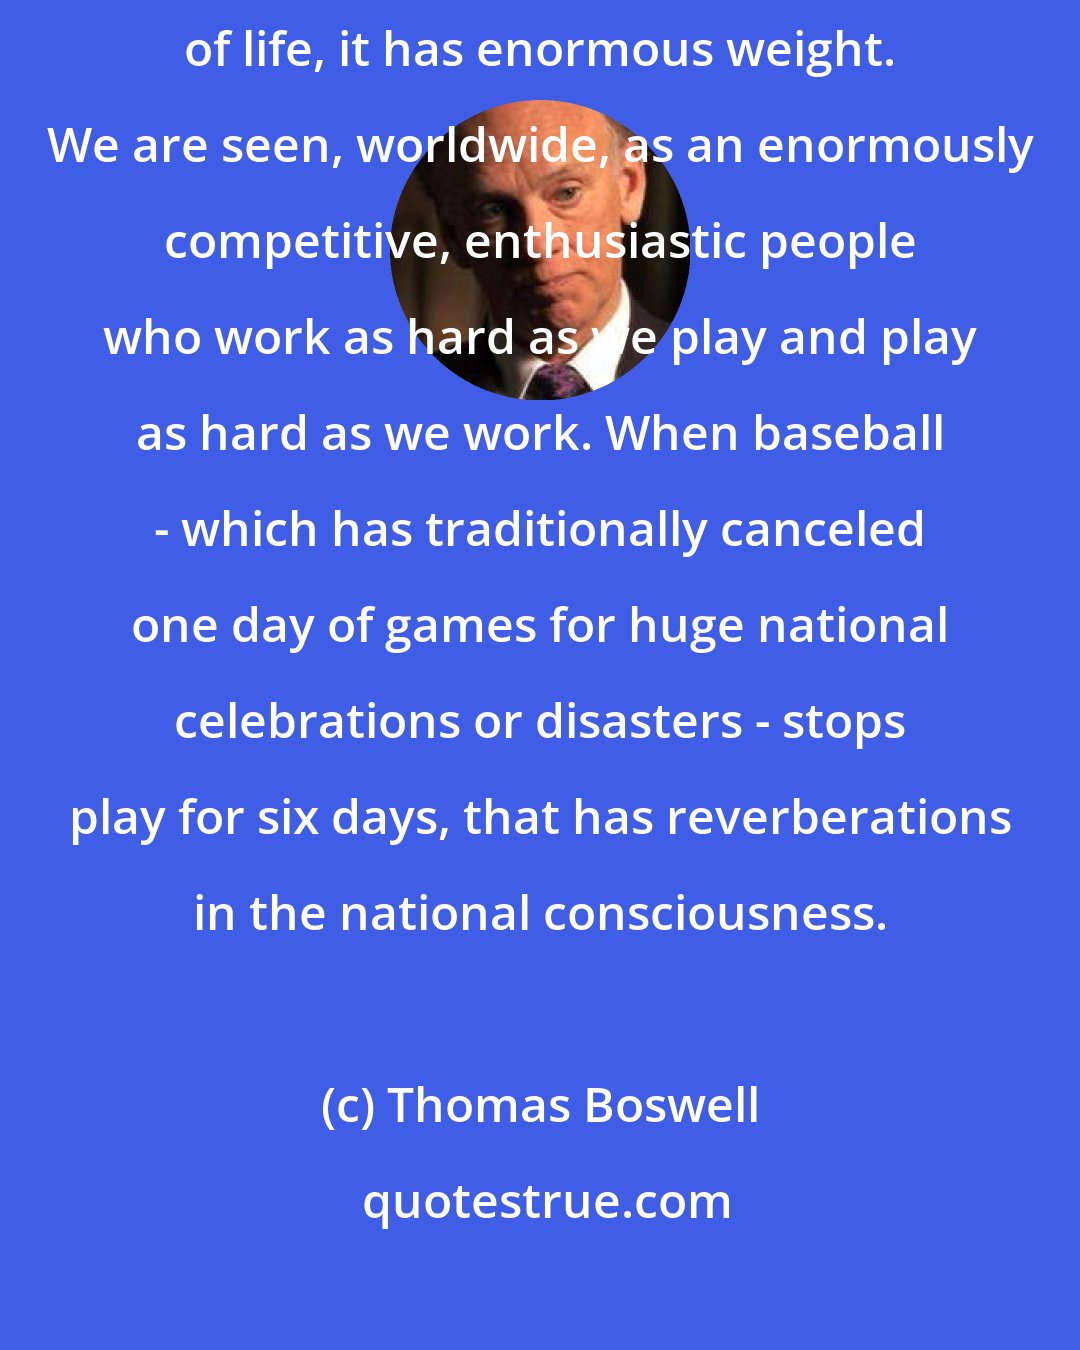 Thomas Boswell: In and of itself, sports may be trivial, but as a symbol of the American way of life, it has enormous weight. We are seen, worldwide, as an enormously competitive, enthusiastic people who work as hard as we play and play as hard as we work. When baseball - which has traditionally canceled one day of games for huge national celebrations or disasters - stops play for six days, that has reverberations in the national consciousness.